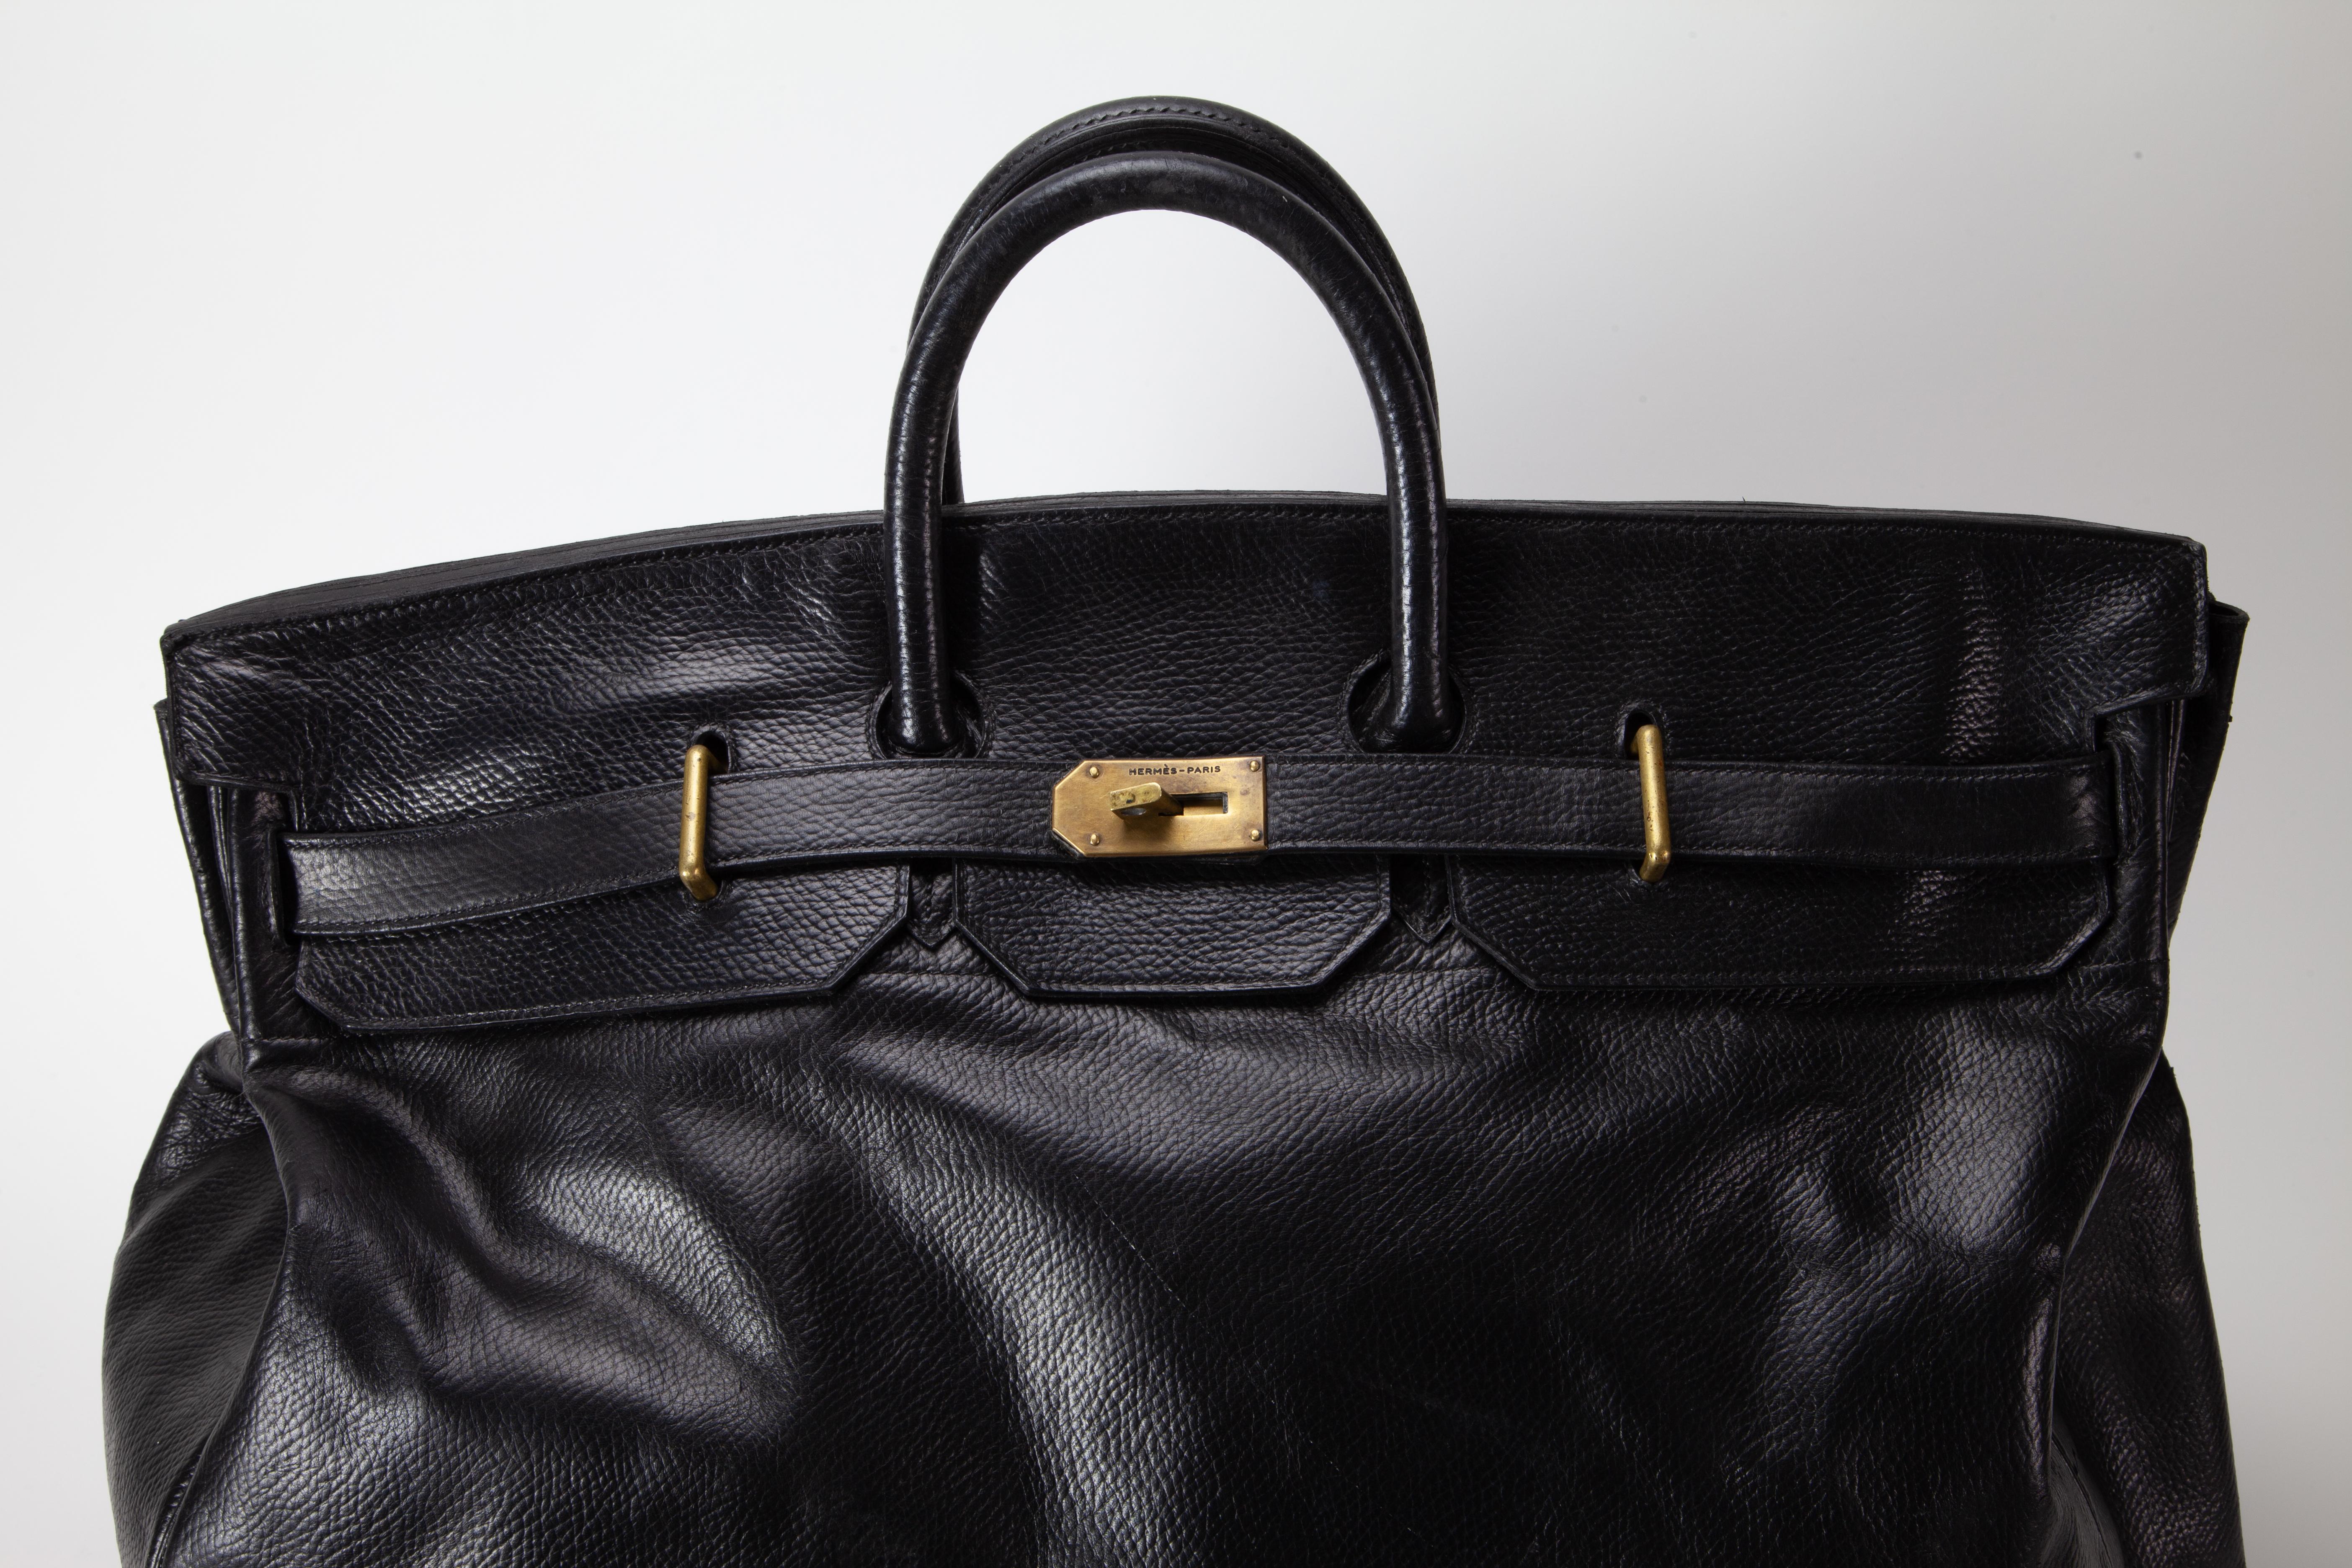 For your consideration is one of the most rare, and spectacular bags we have ever come across. This bag is in incredible structural condition, with many years of life left it. At 55cm, this is one of the largest bags Hermes ever made. All corners